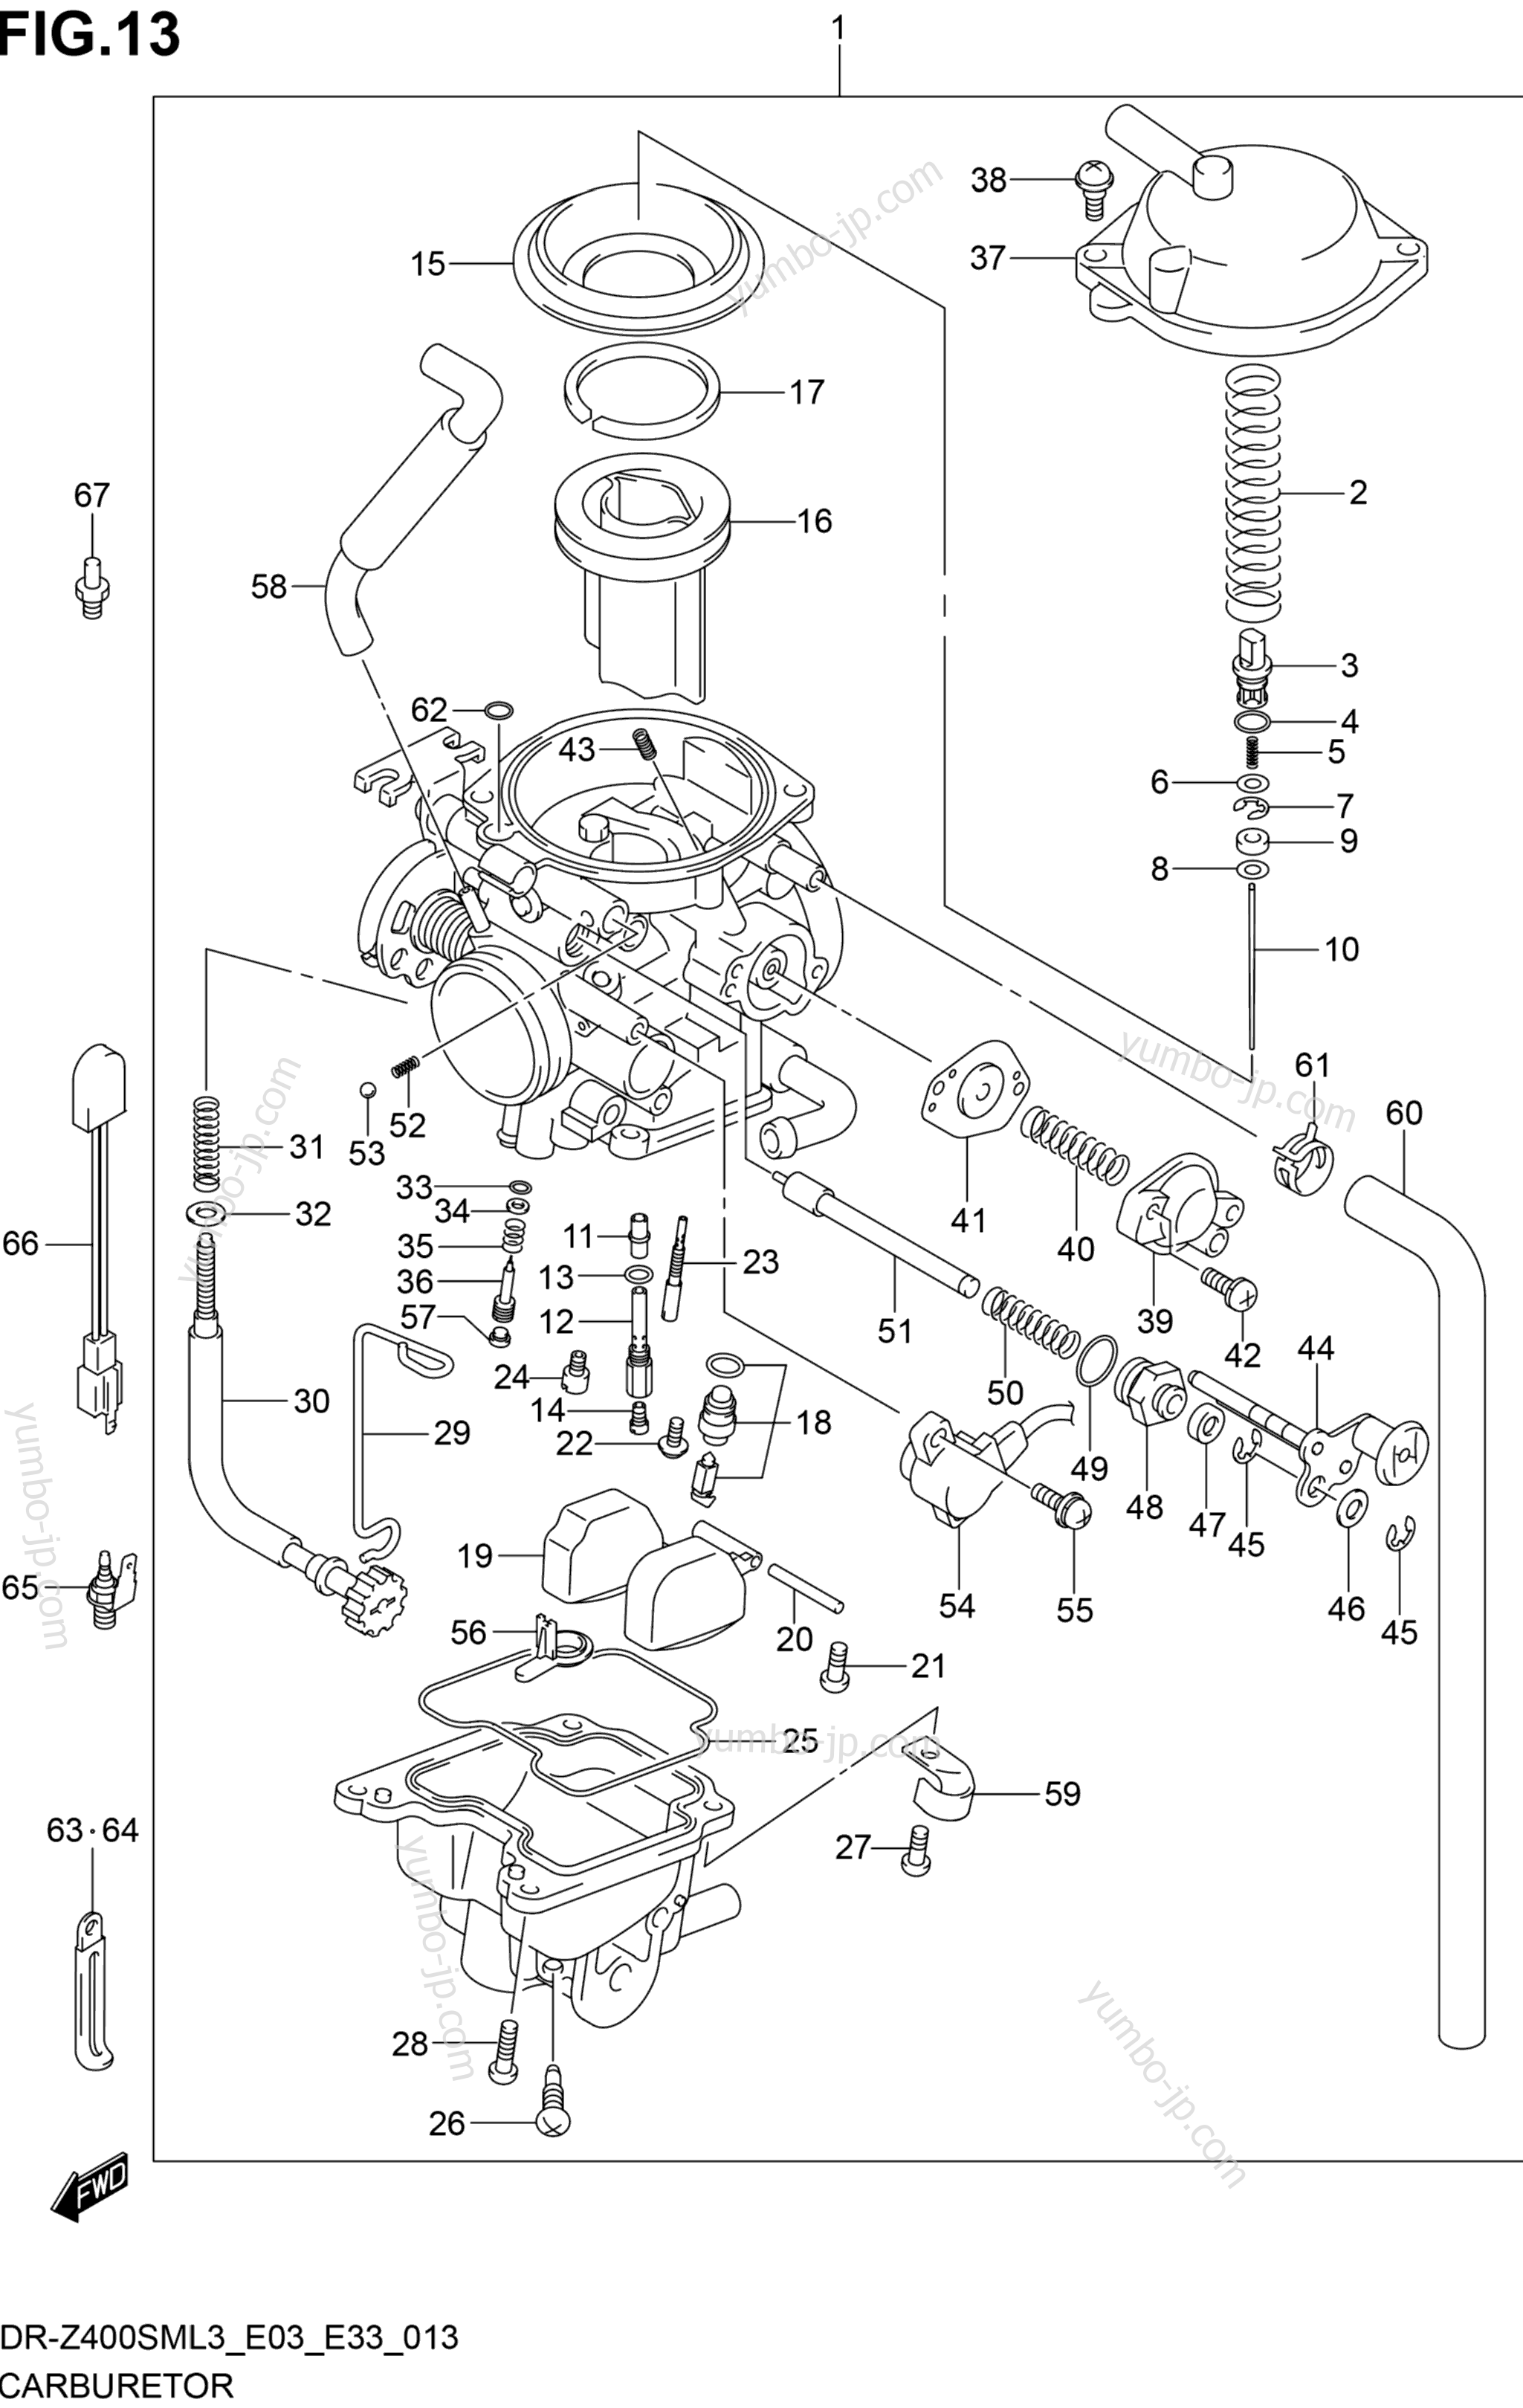 CARBURETOR (DR-Z400SML3 E33) for motorcycles SUZUKI DR-Z400SM 2013 year